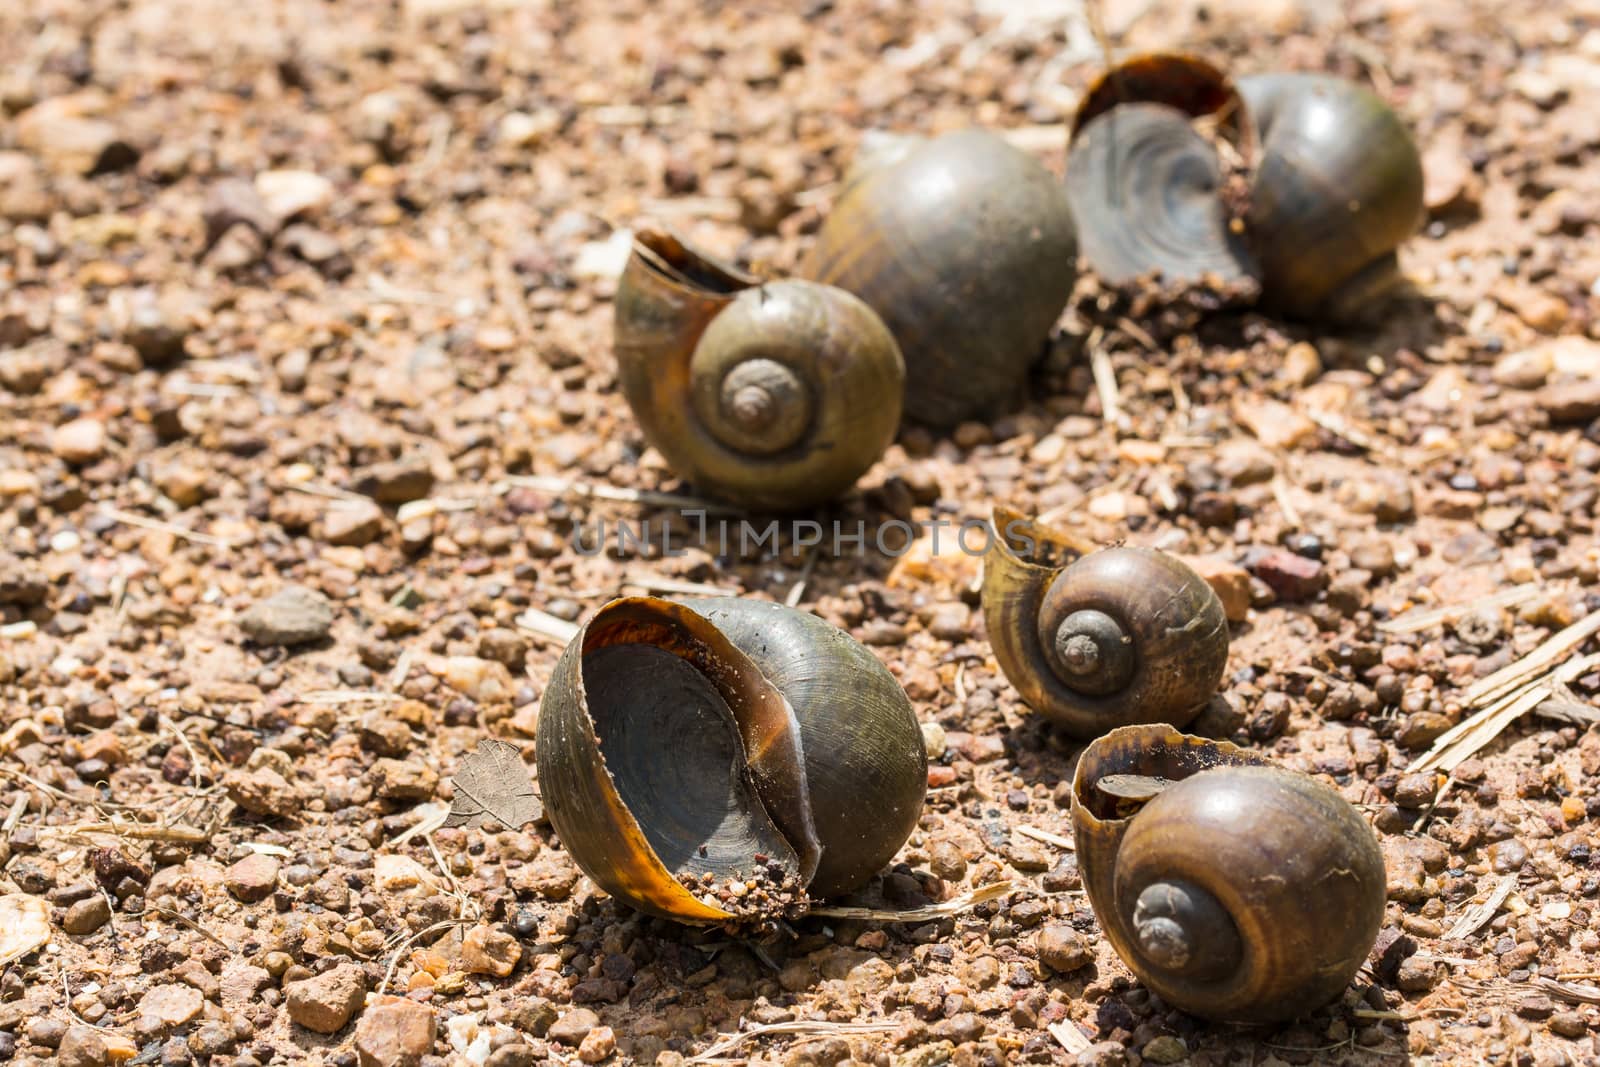 snails died on the sand rock under the hot sun light